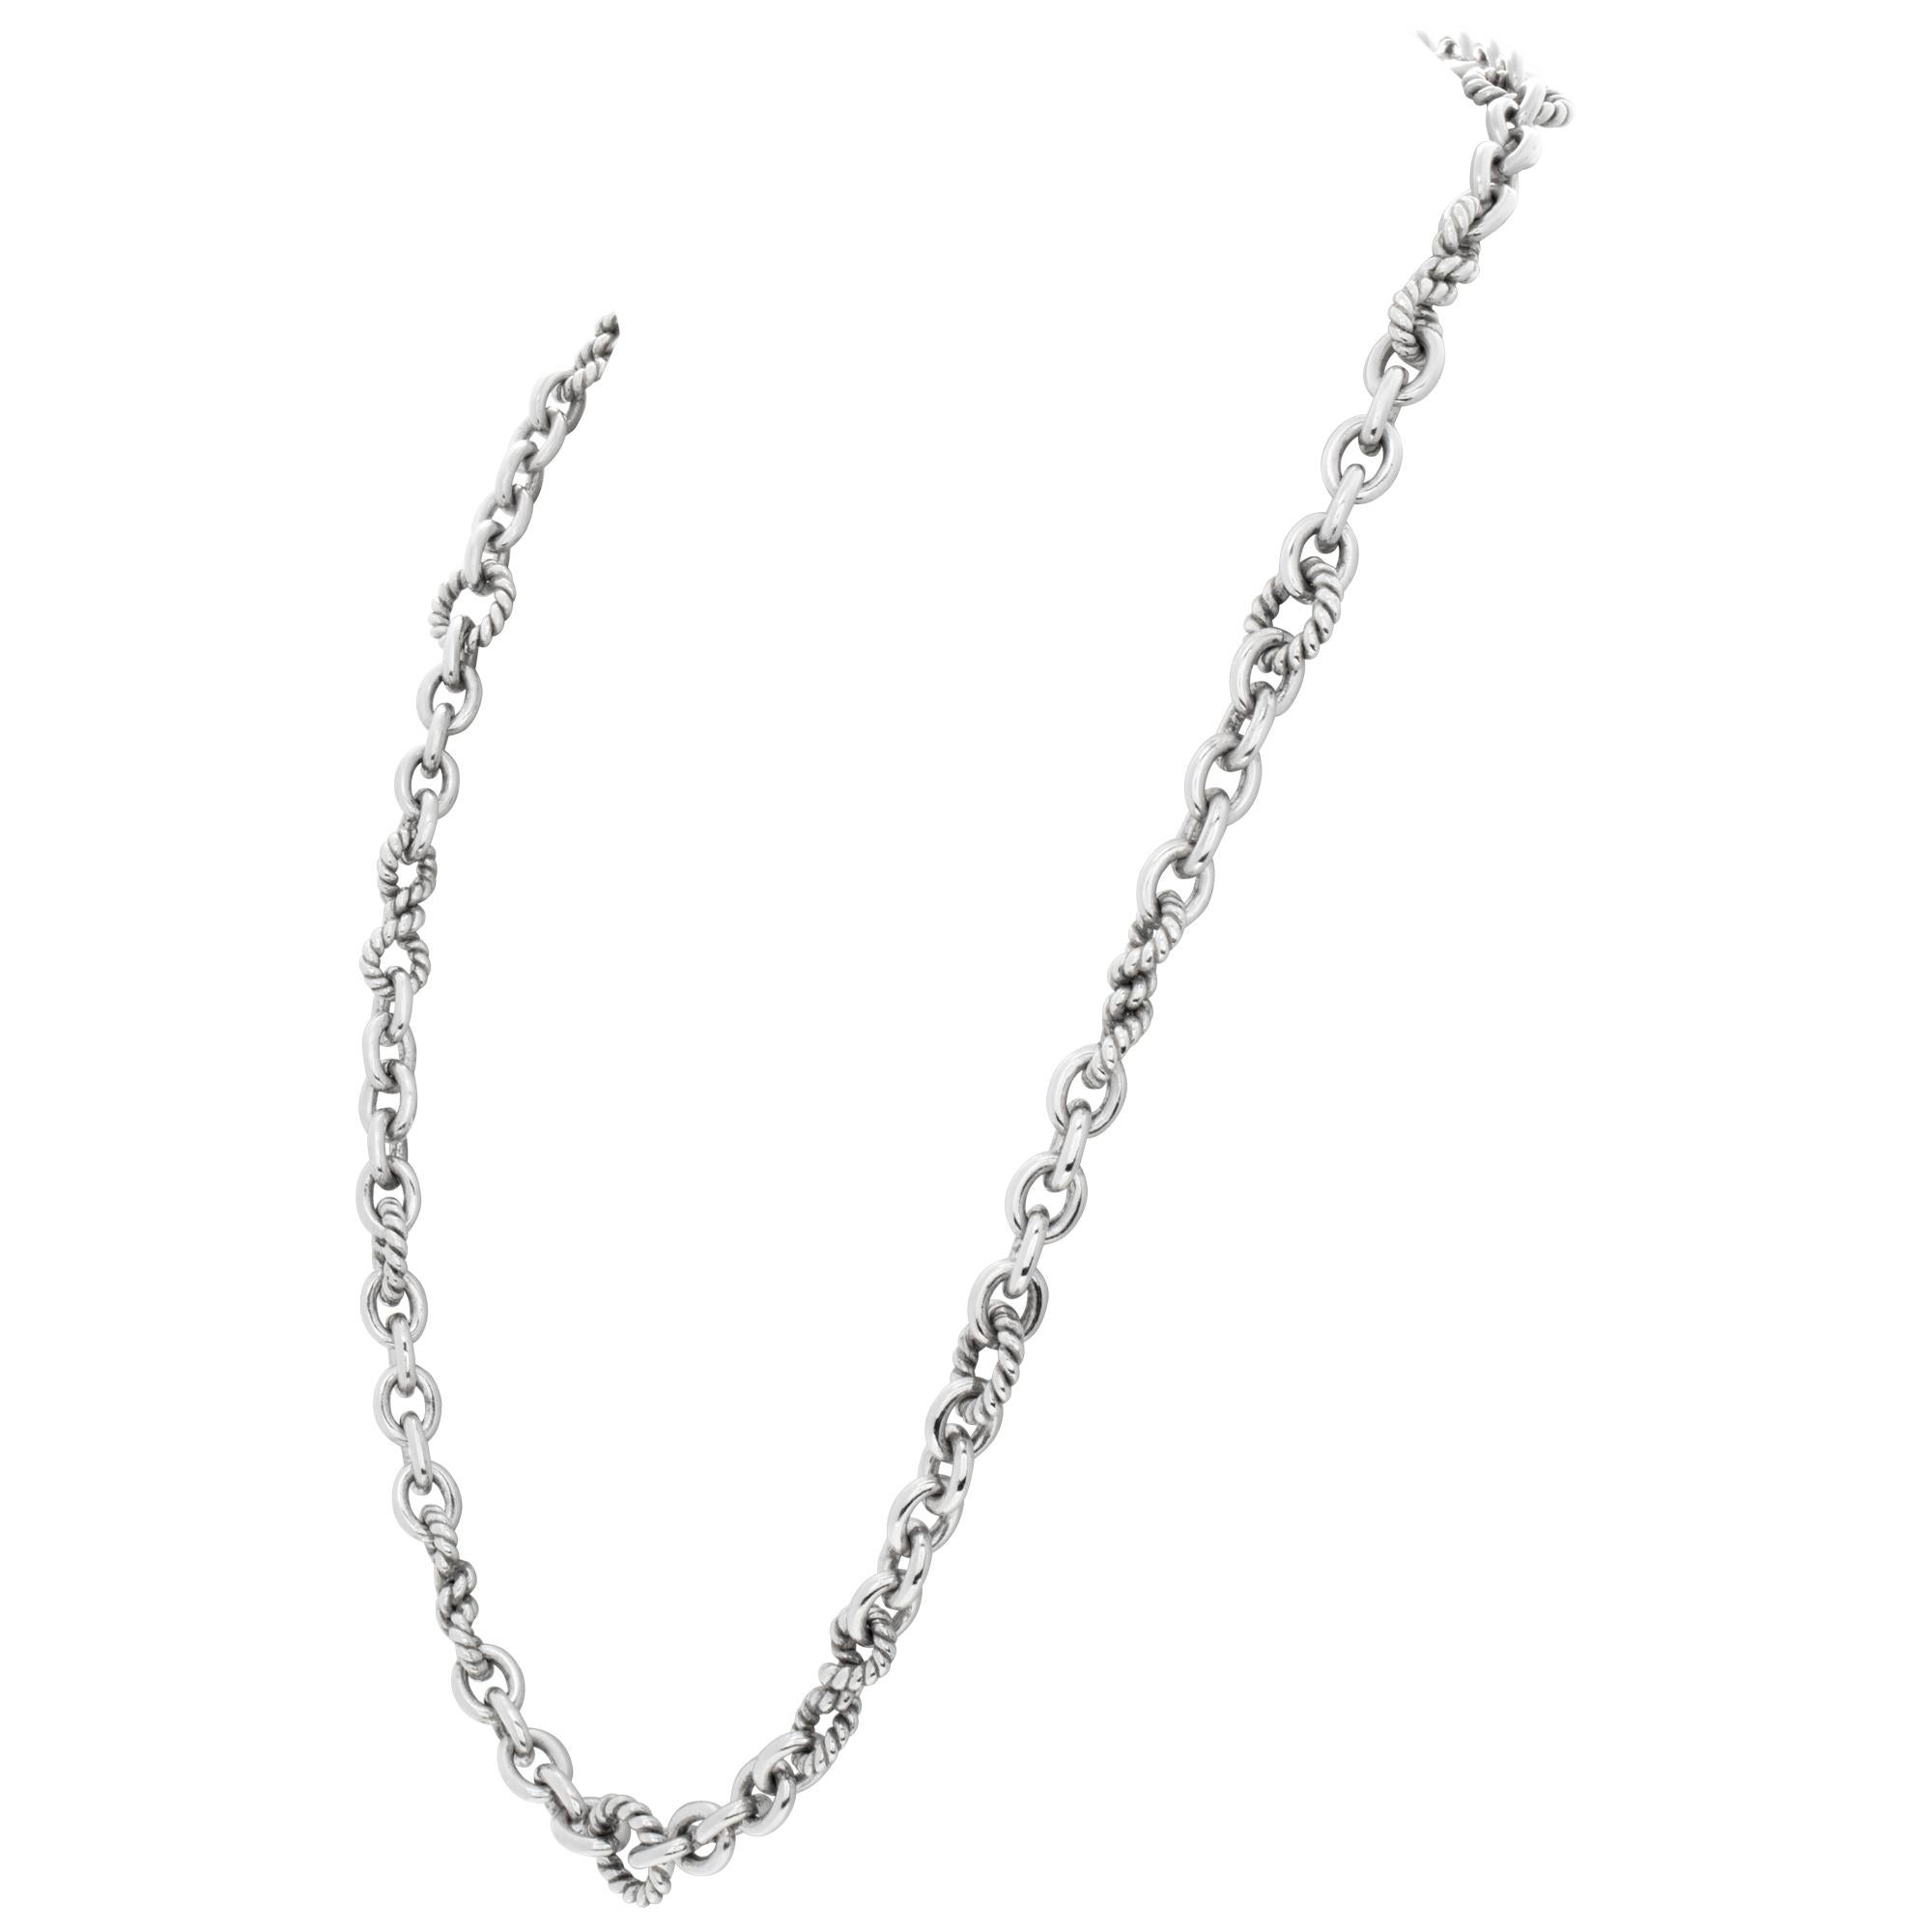 Judith Ripka twisted o-ring chain necklace in sterling silver. Length 20 inches, width 11mm.
